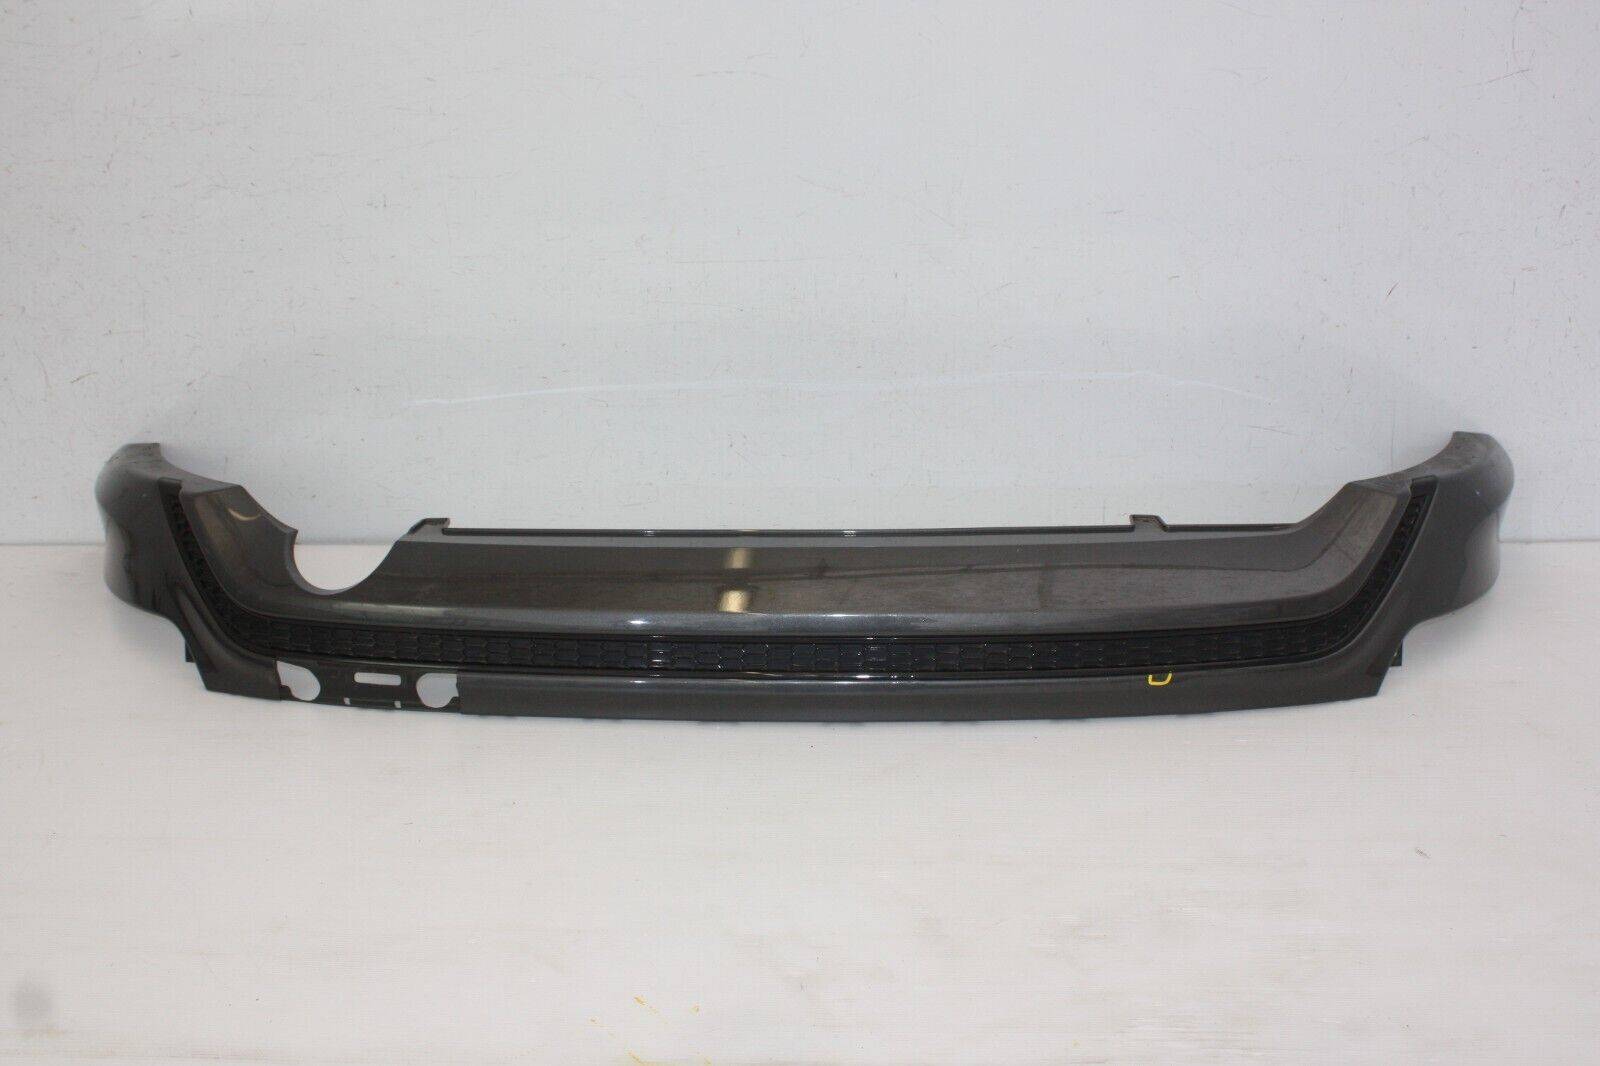 Ford Focus ST Line Rear Bumper Lower Section 2014 TO 2018 F1EJ 17E956 D1 175594464680